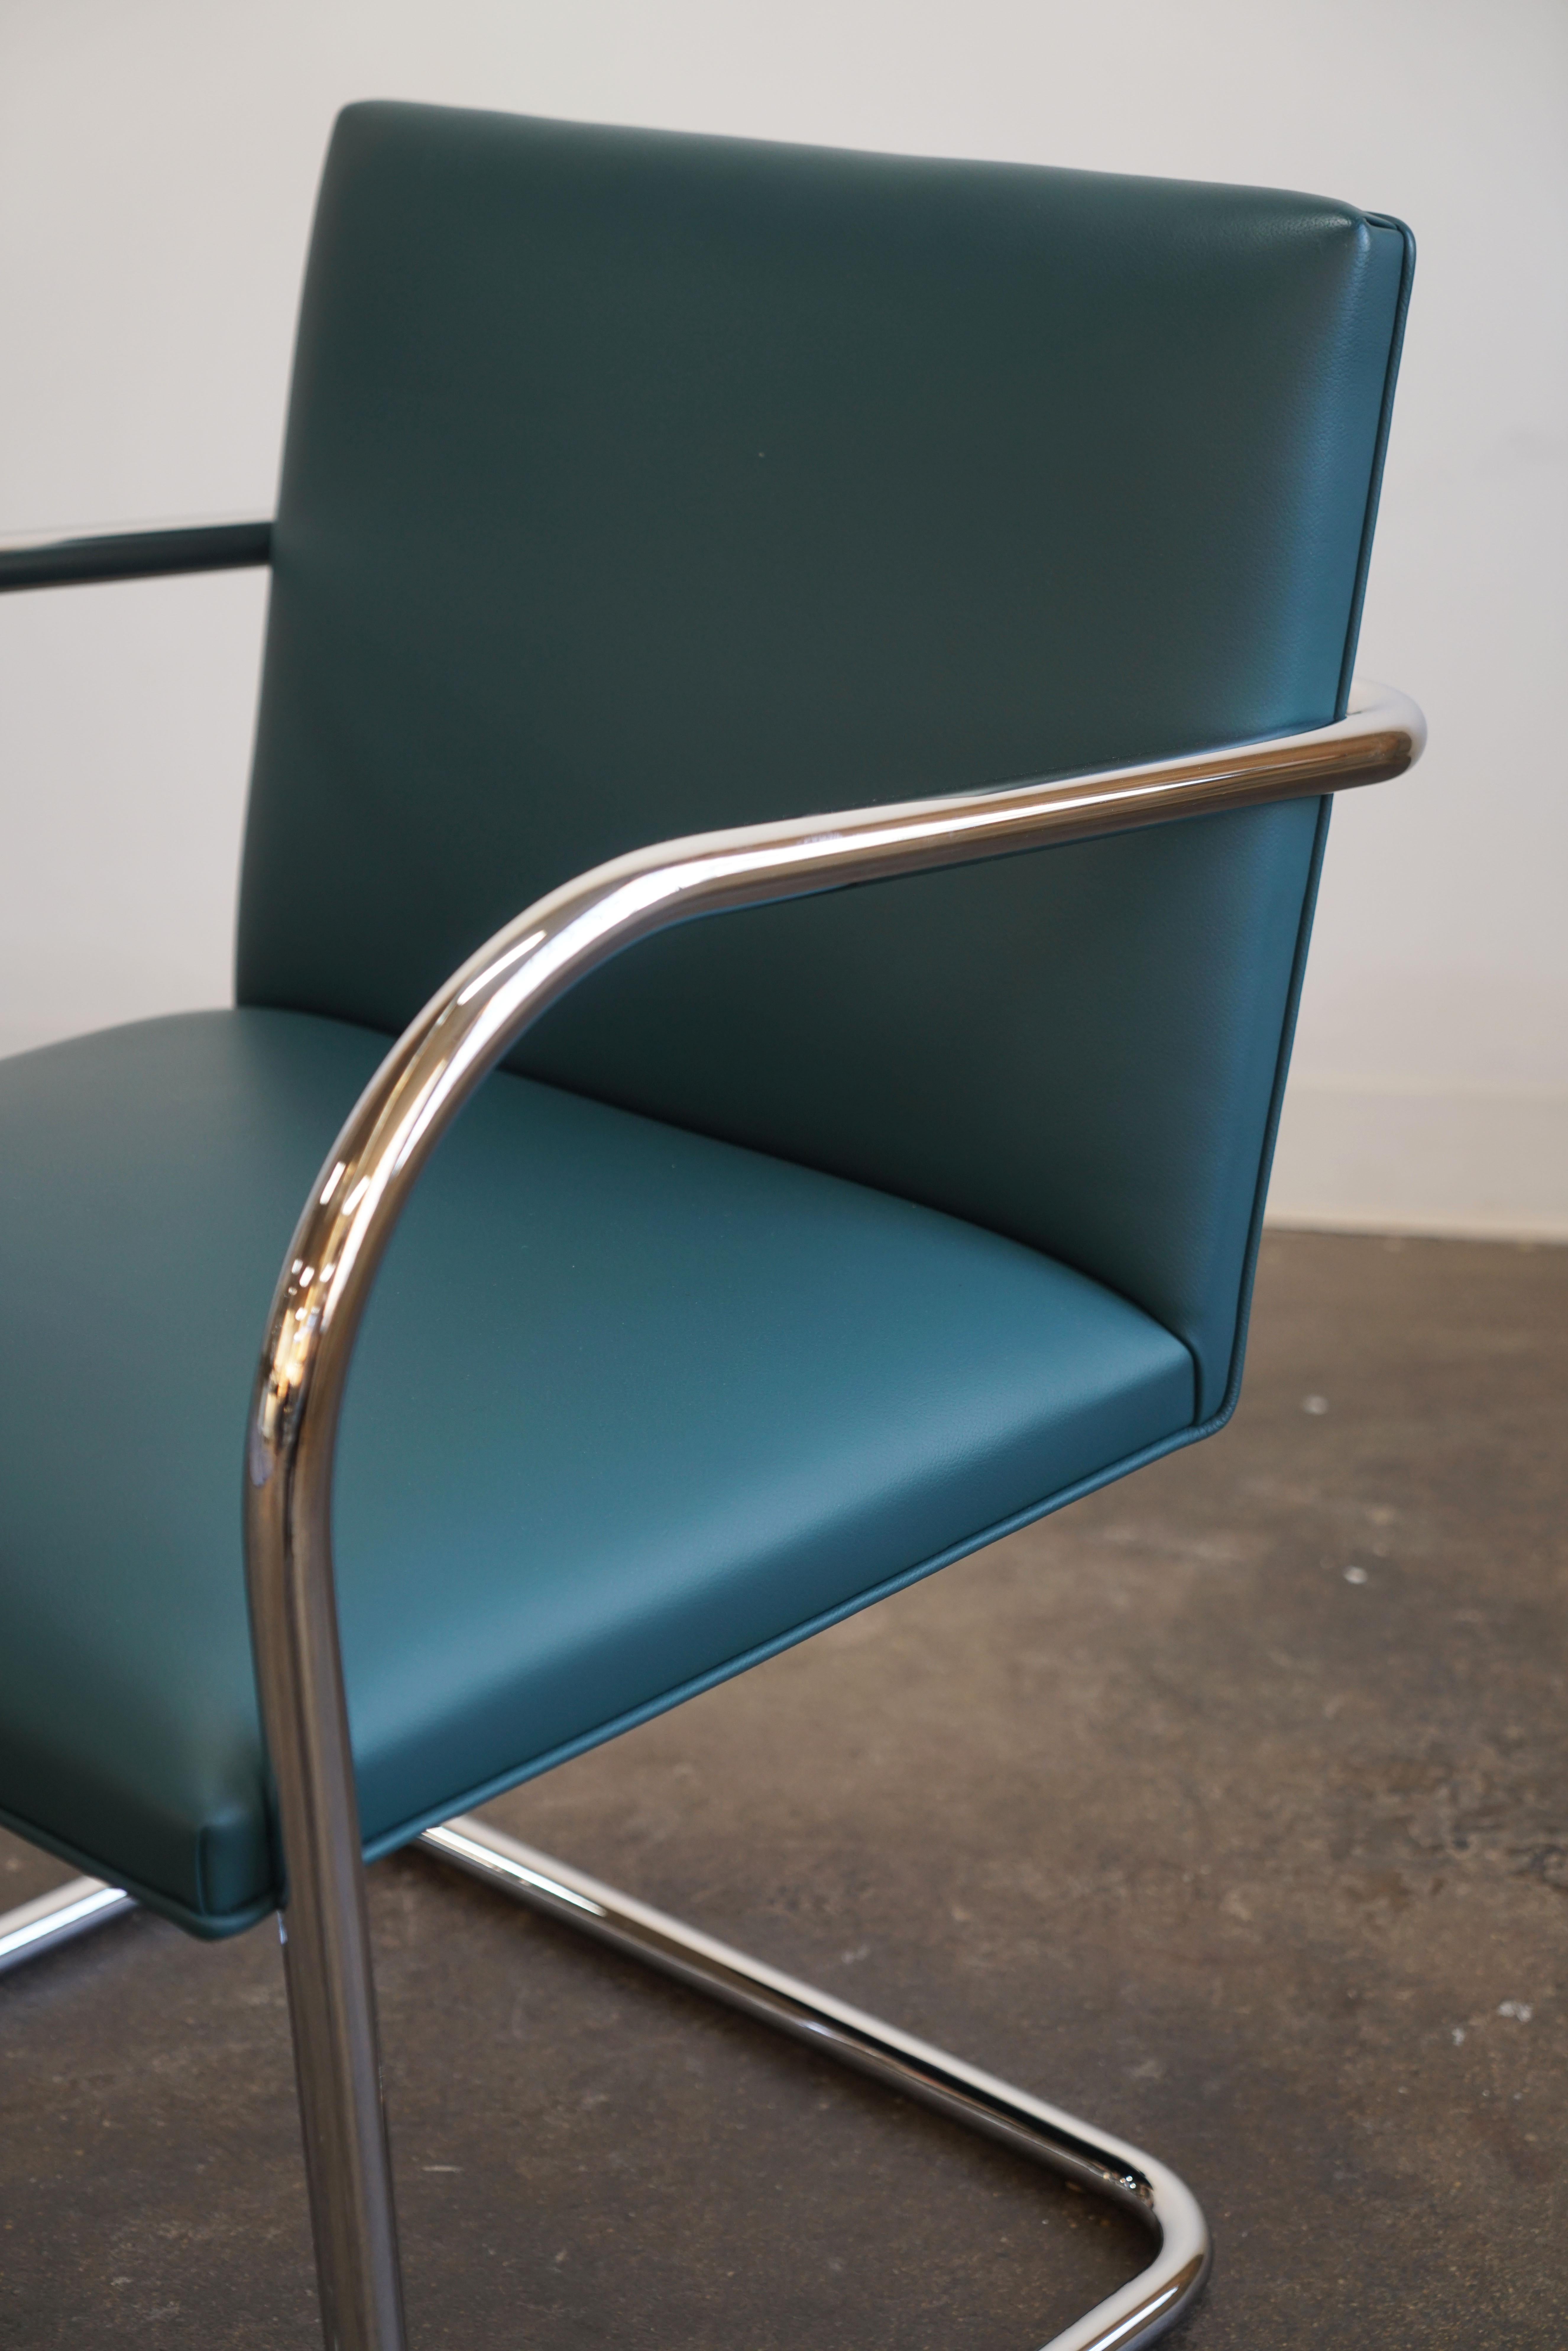 Four Mies van der Rohe Knoll BRNO tubular armchairs in teal leather For Sale 1